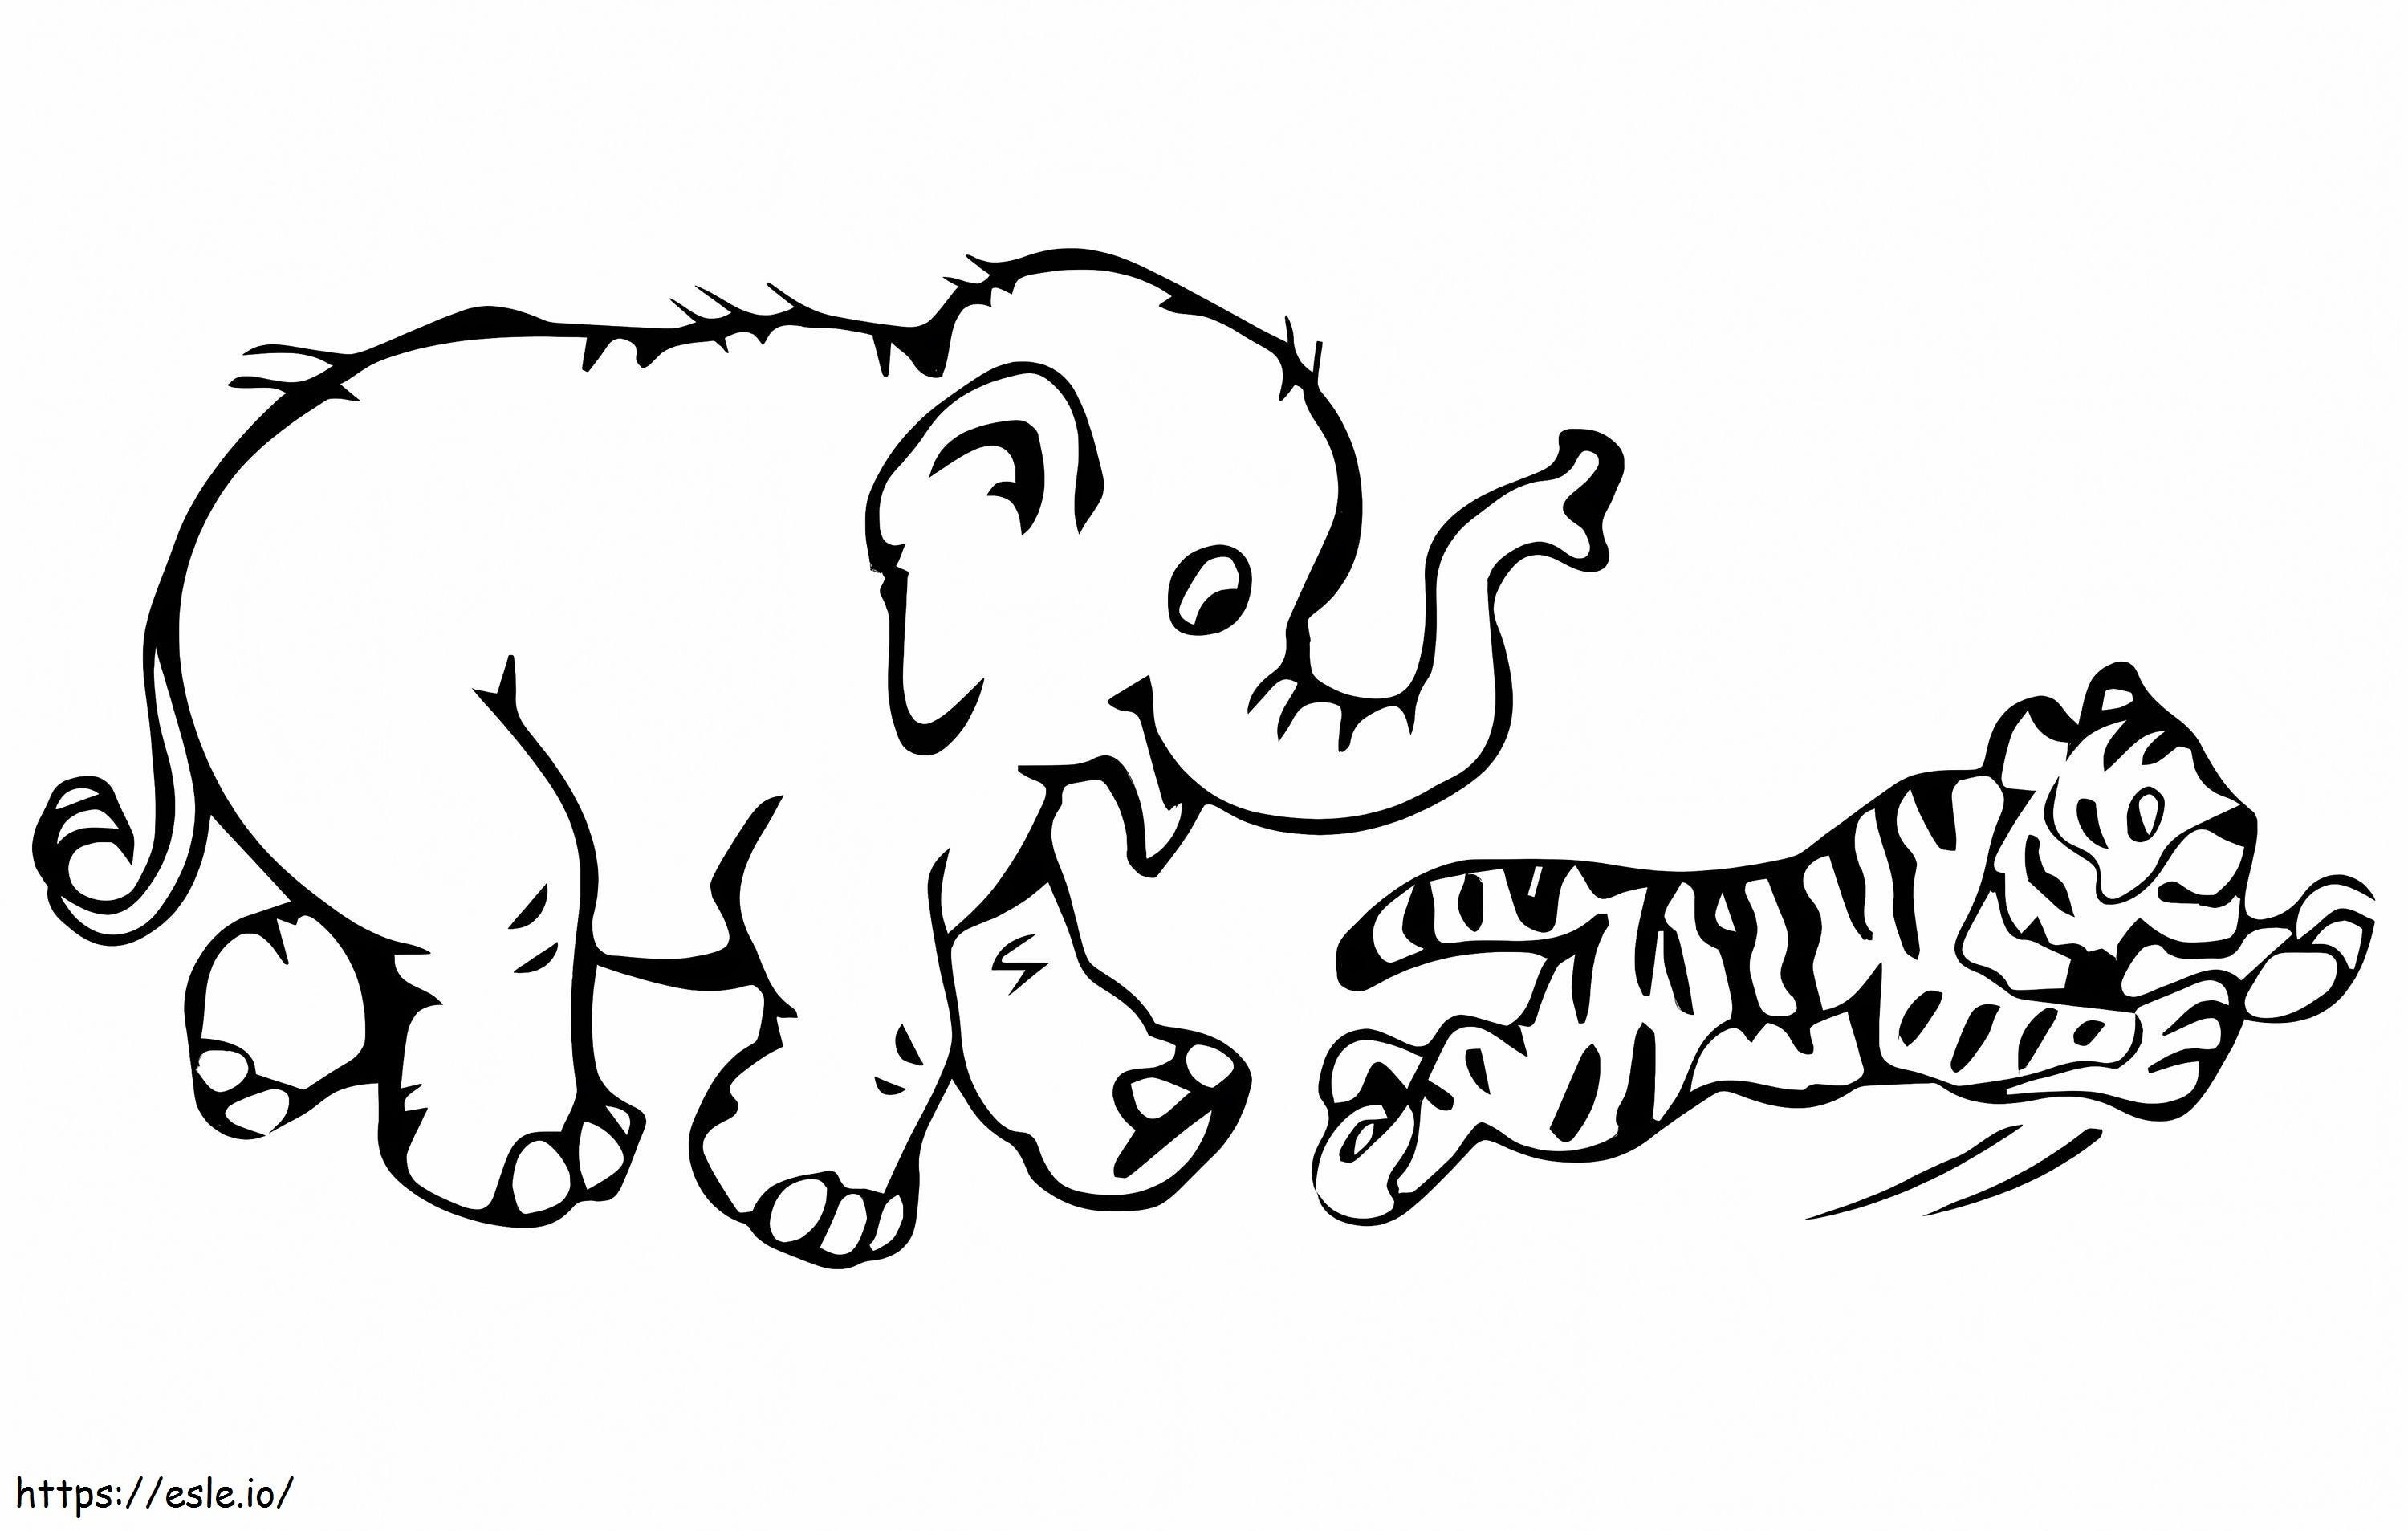 Elephant And Tiger coloring page